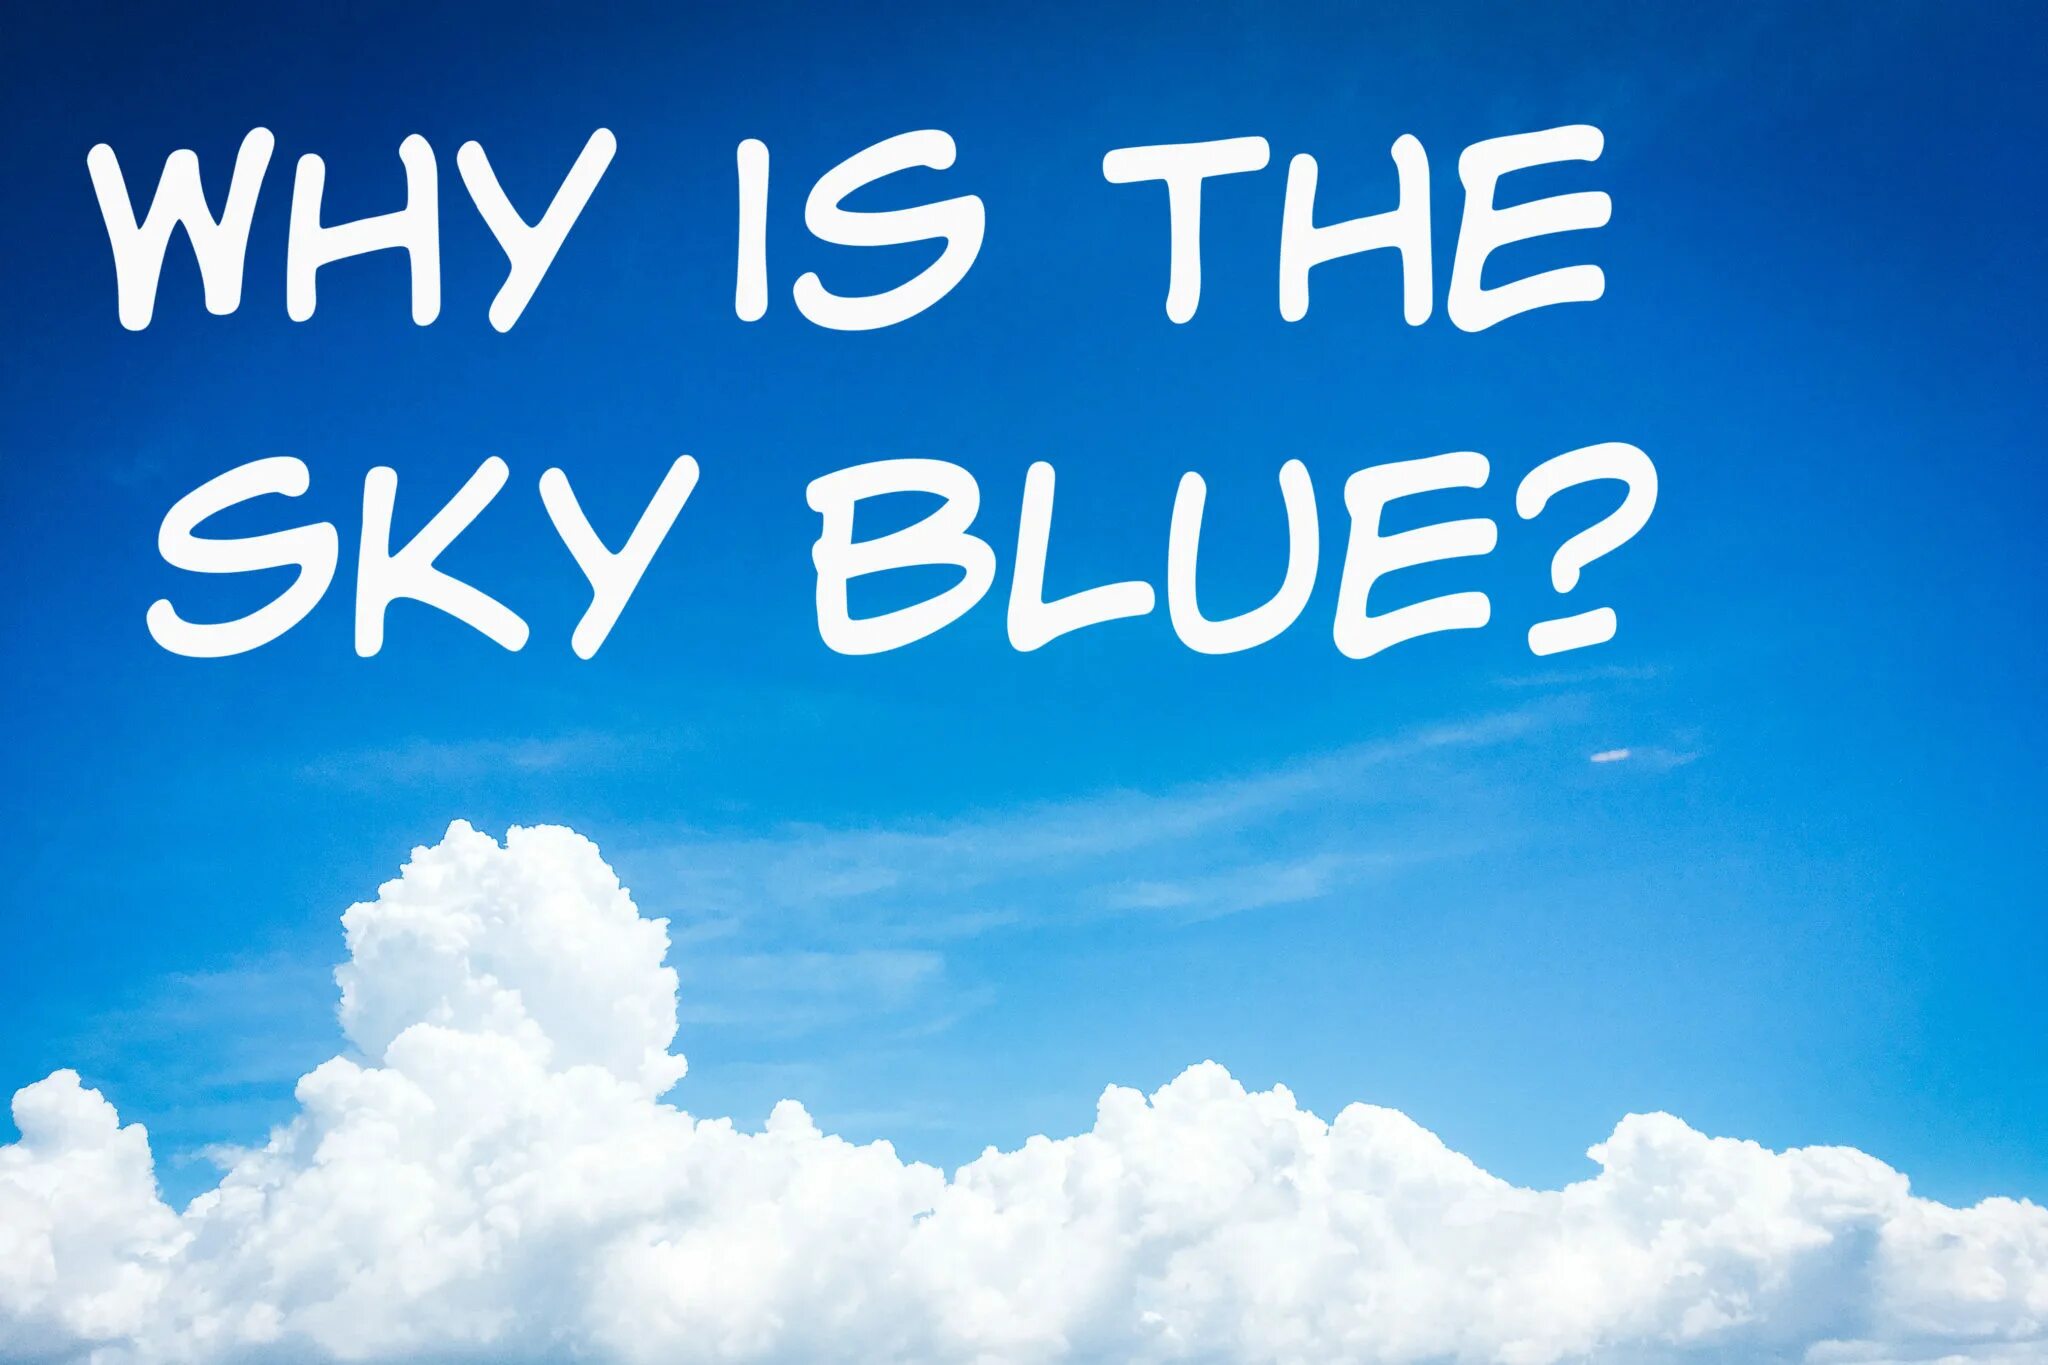 Why is the Sky Blue. The Sky is. Blue Sky человек. Be Blue. Ис небо